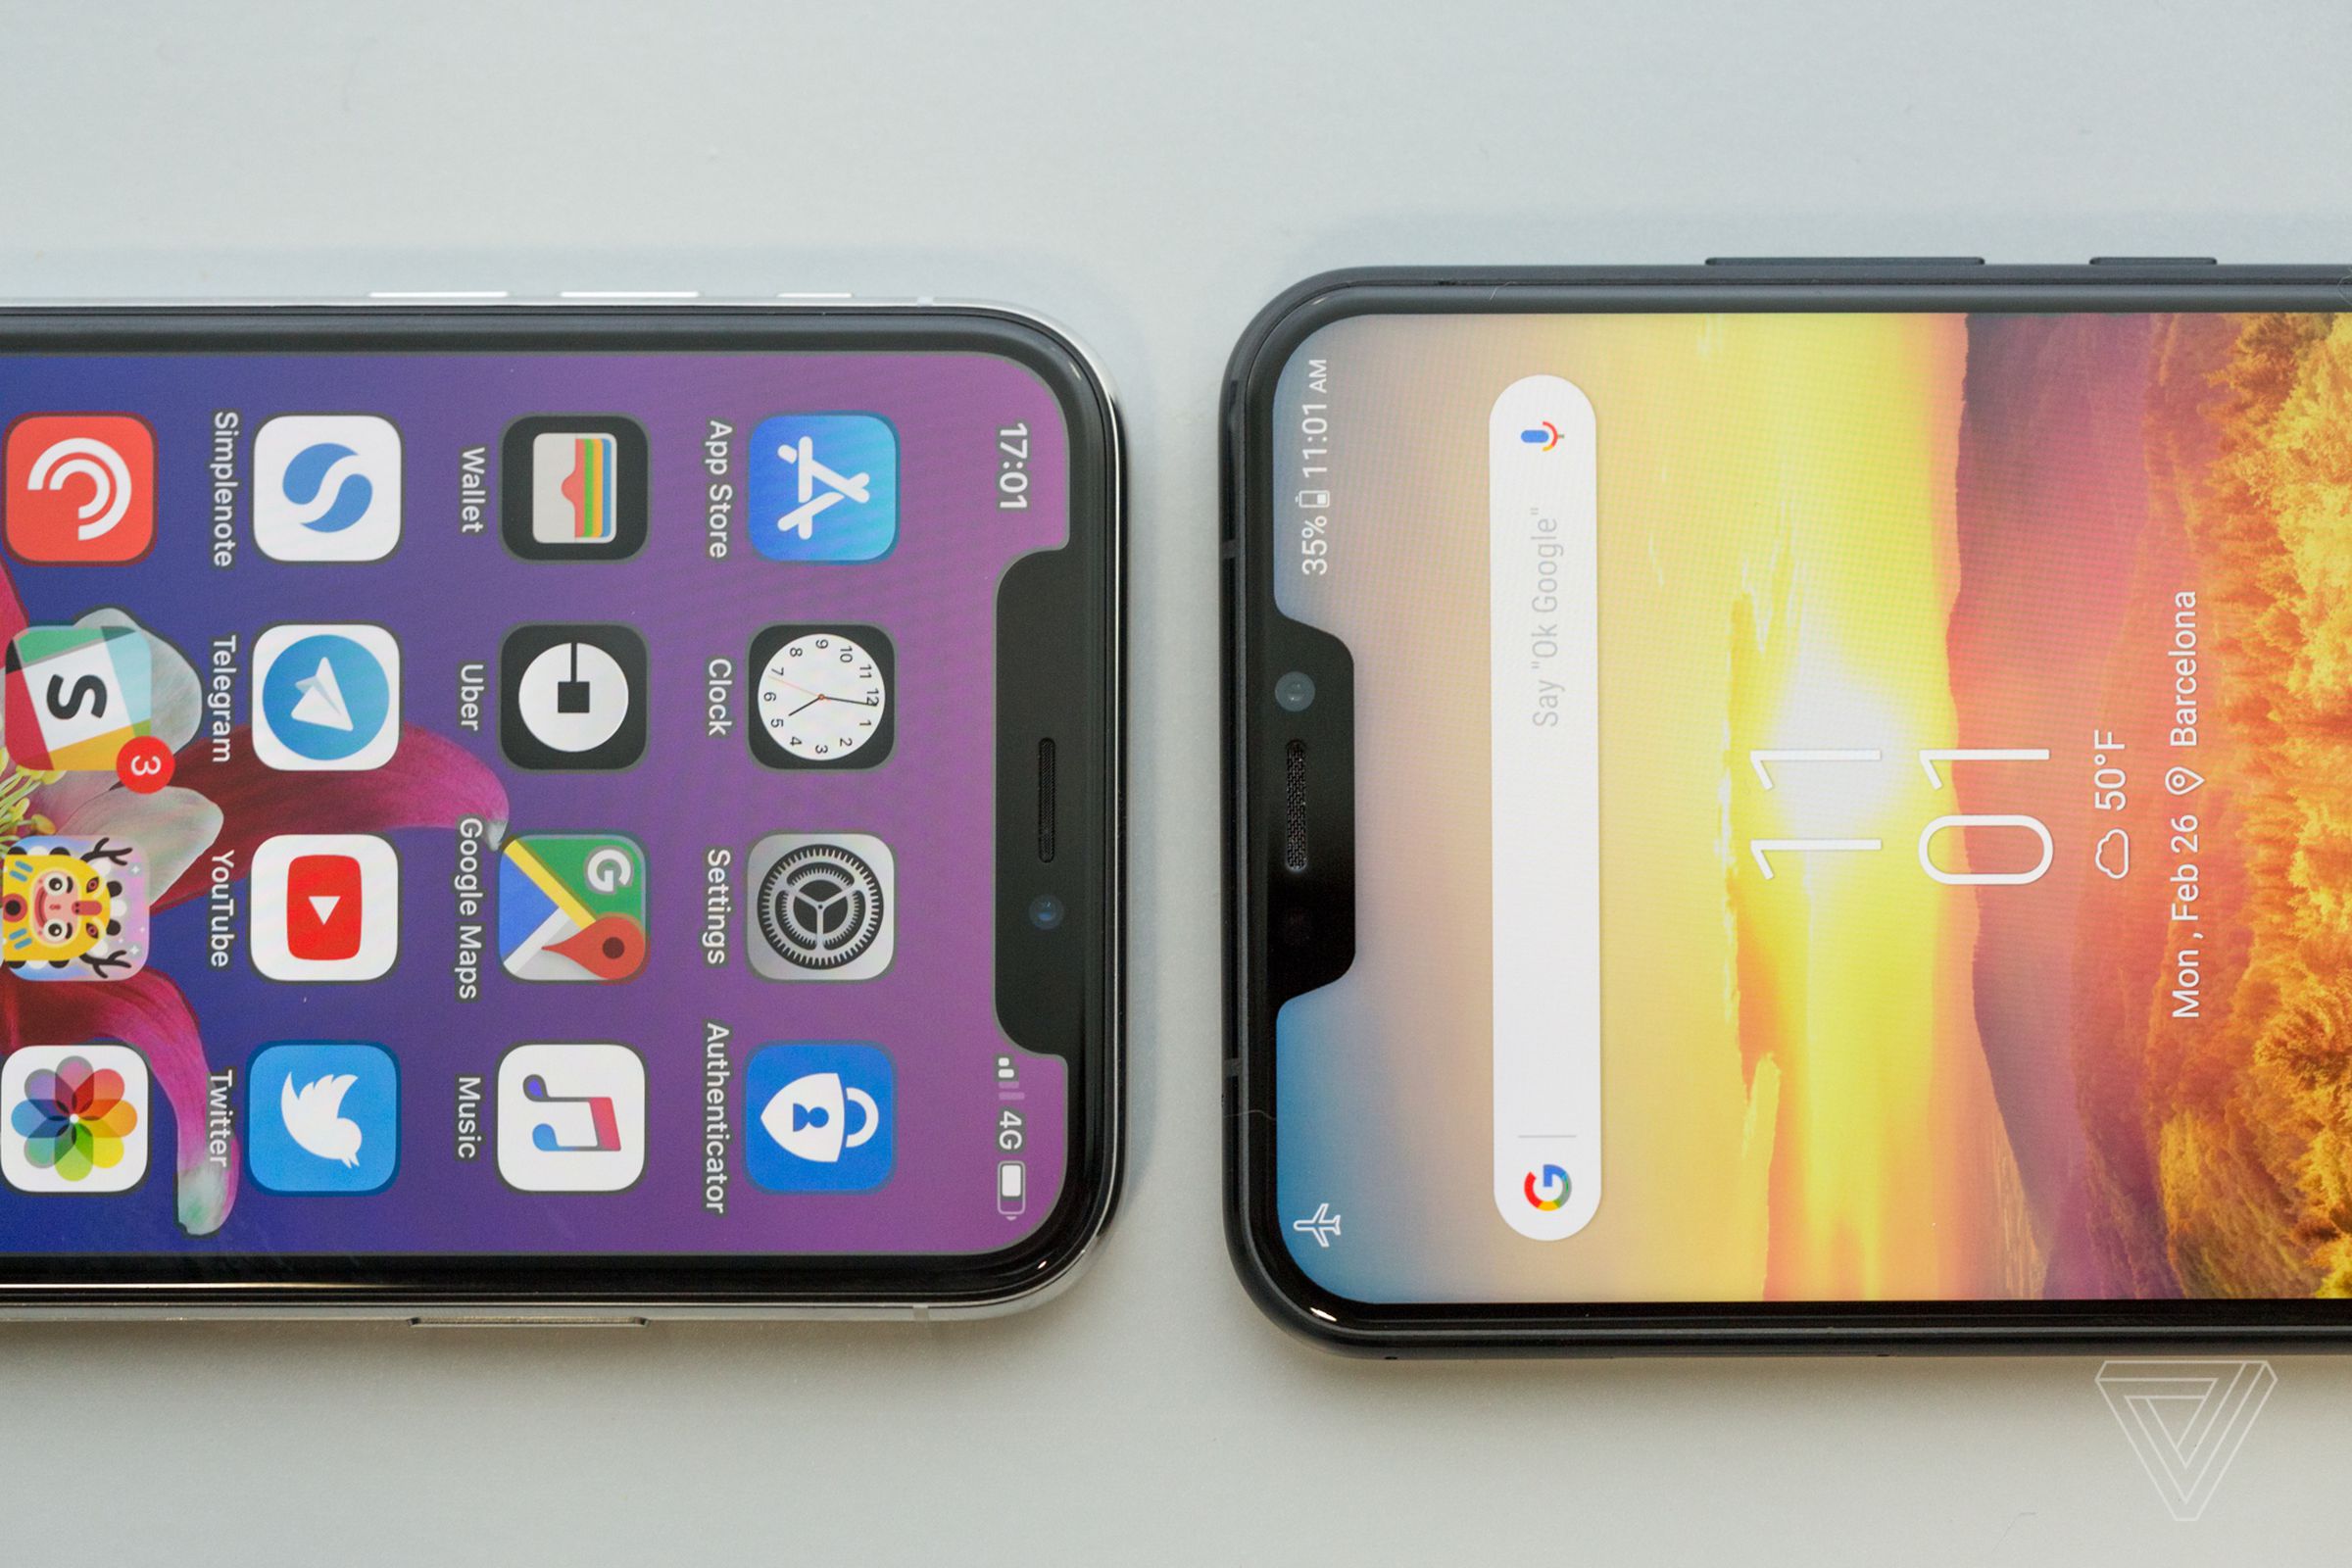 iPhone X and Zenfone 5.